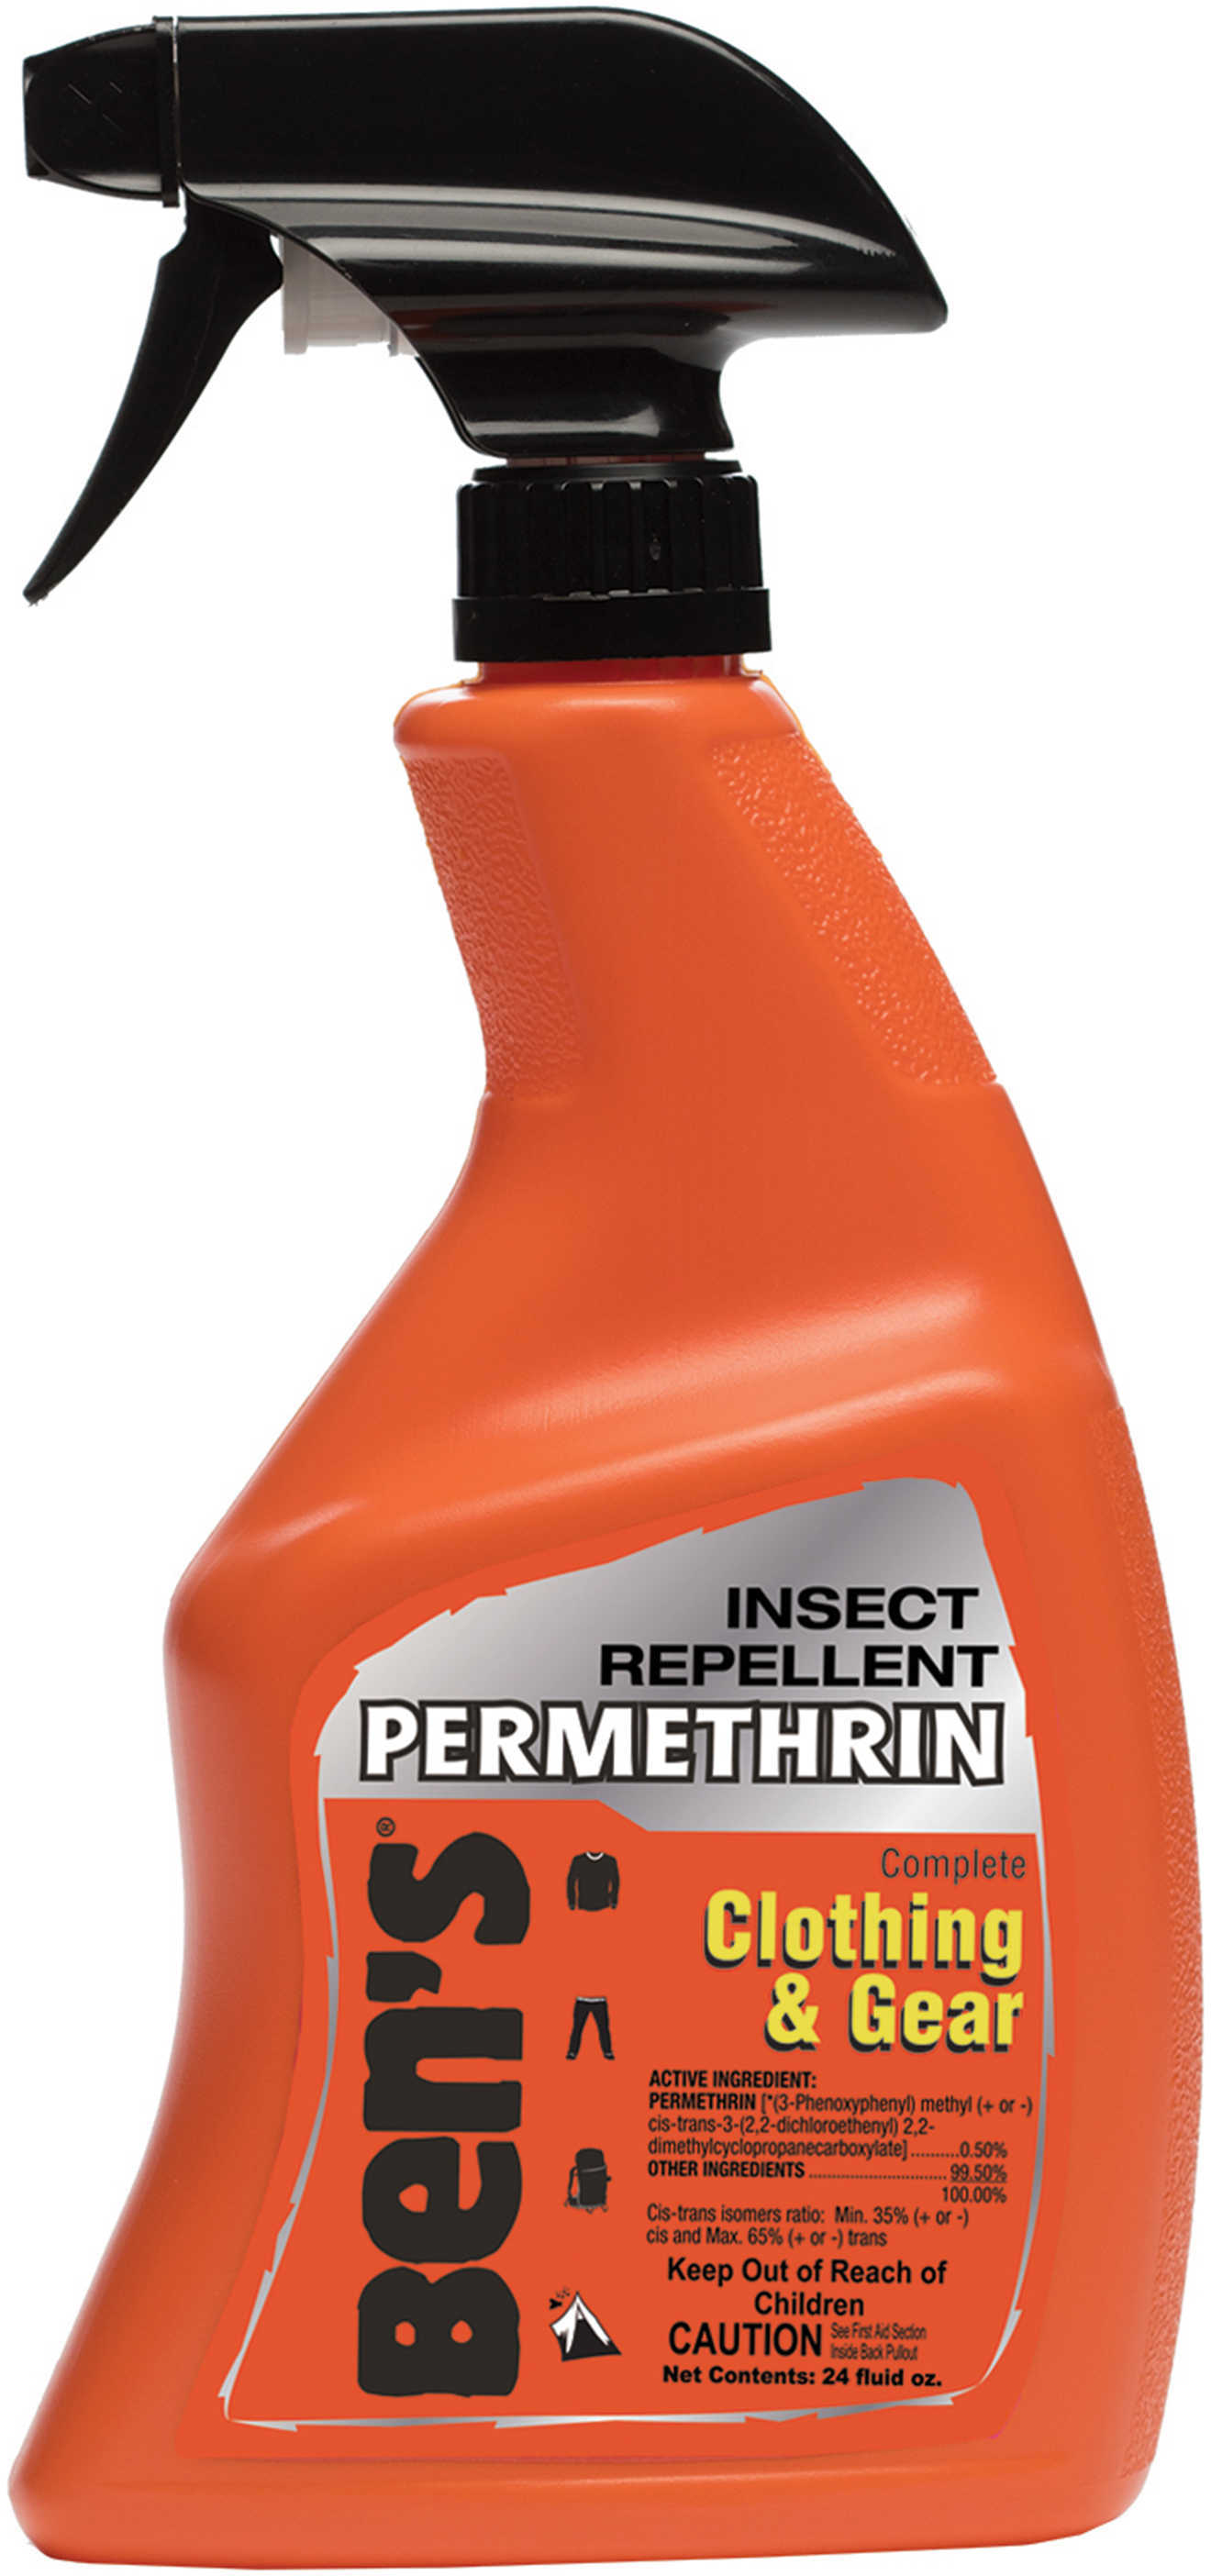 Bens / Tender Corp AMK INSECT Repellent PERMETHRIN Clothing/Gear 24Oz